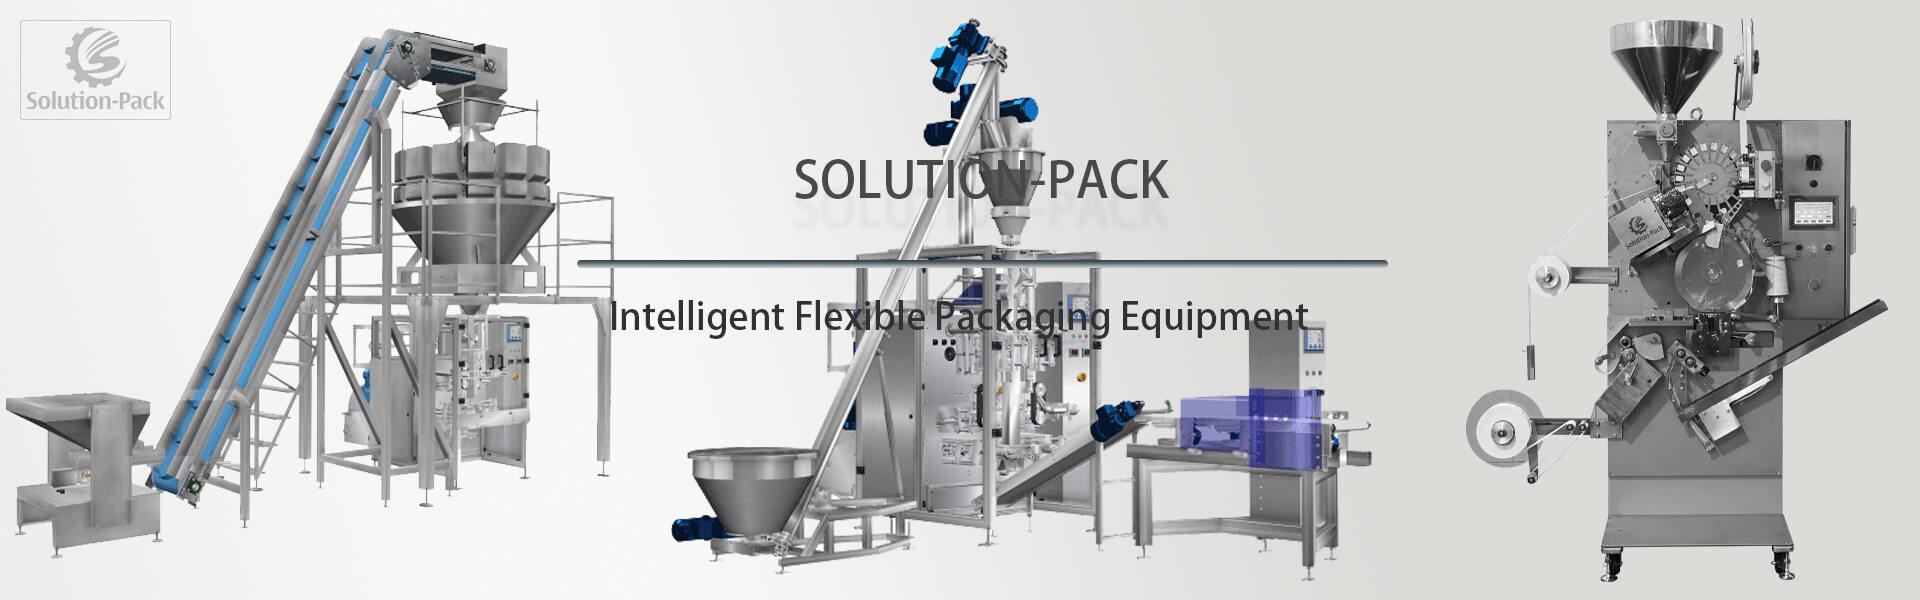 Solution-Pack | Intelligent Flexible Packaging Machine Equipment | Automatic Packaging Machine System | Heading Banner Picture 